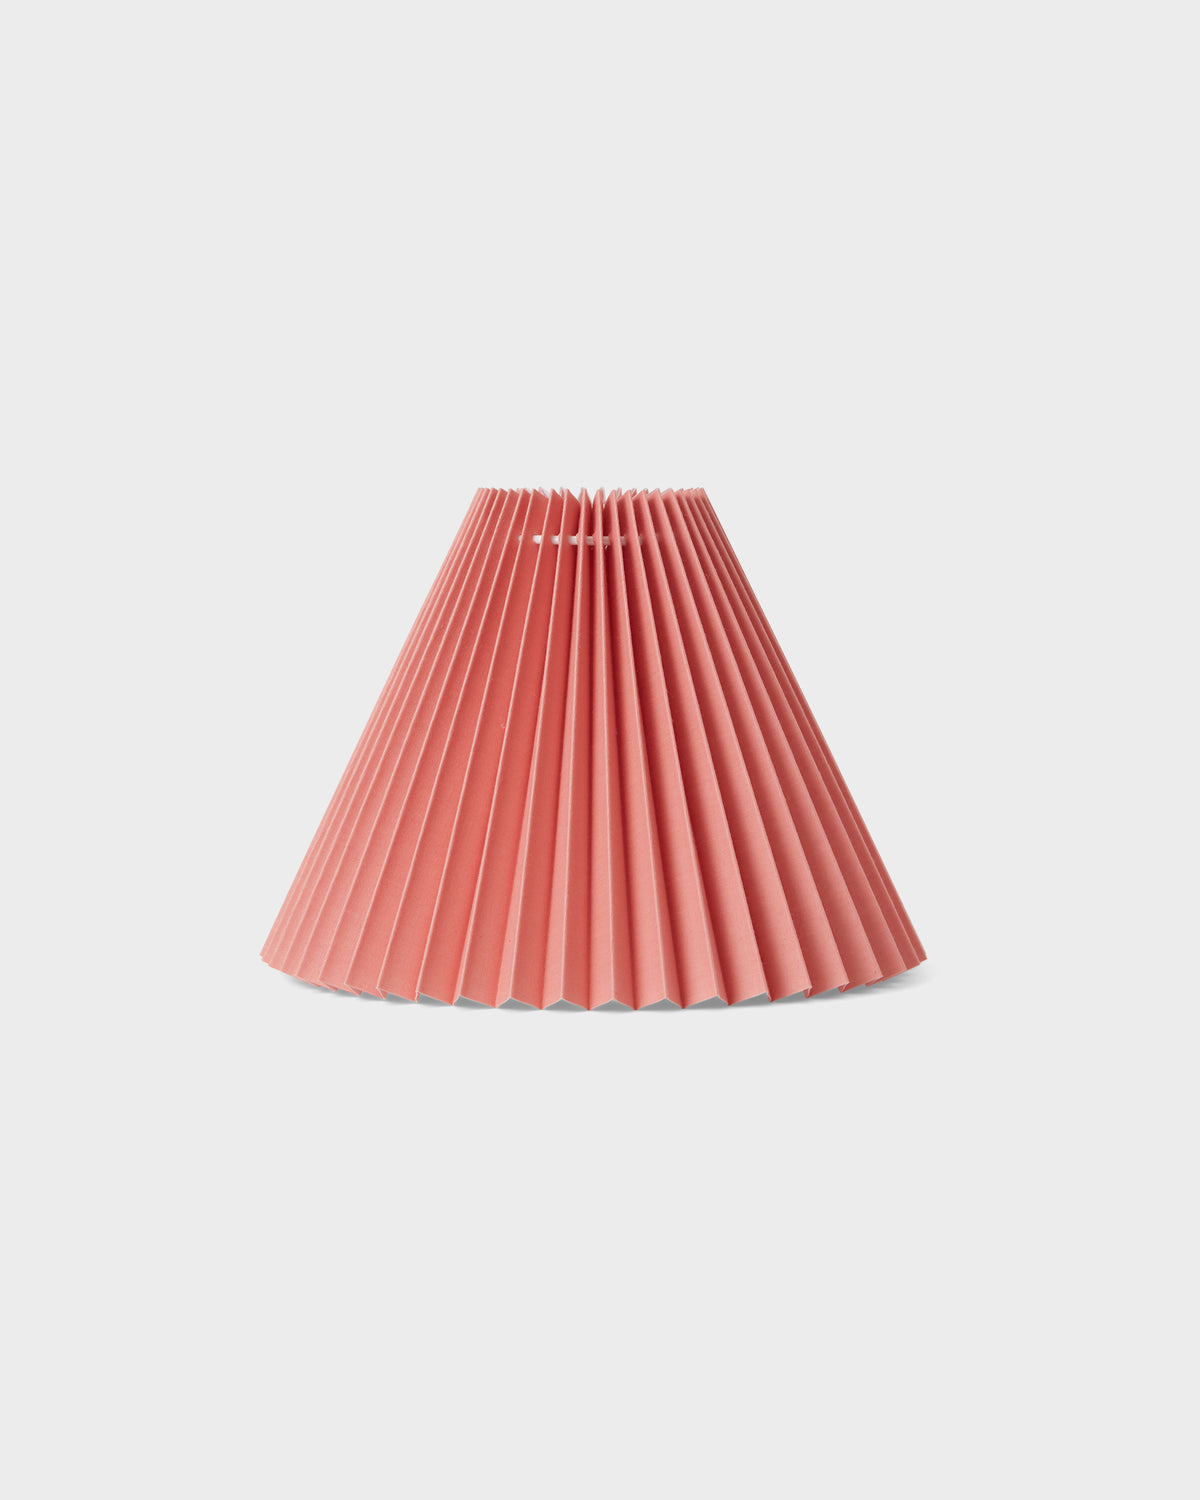 Pleated Lampshade - Pink - 23 cm